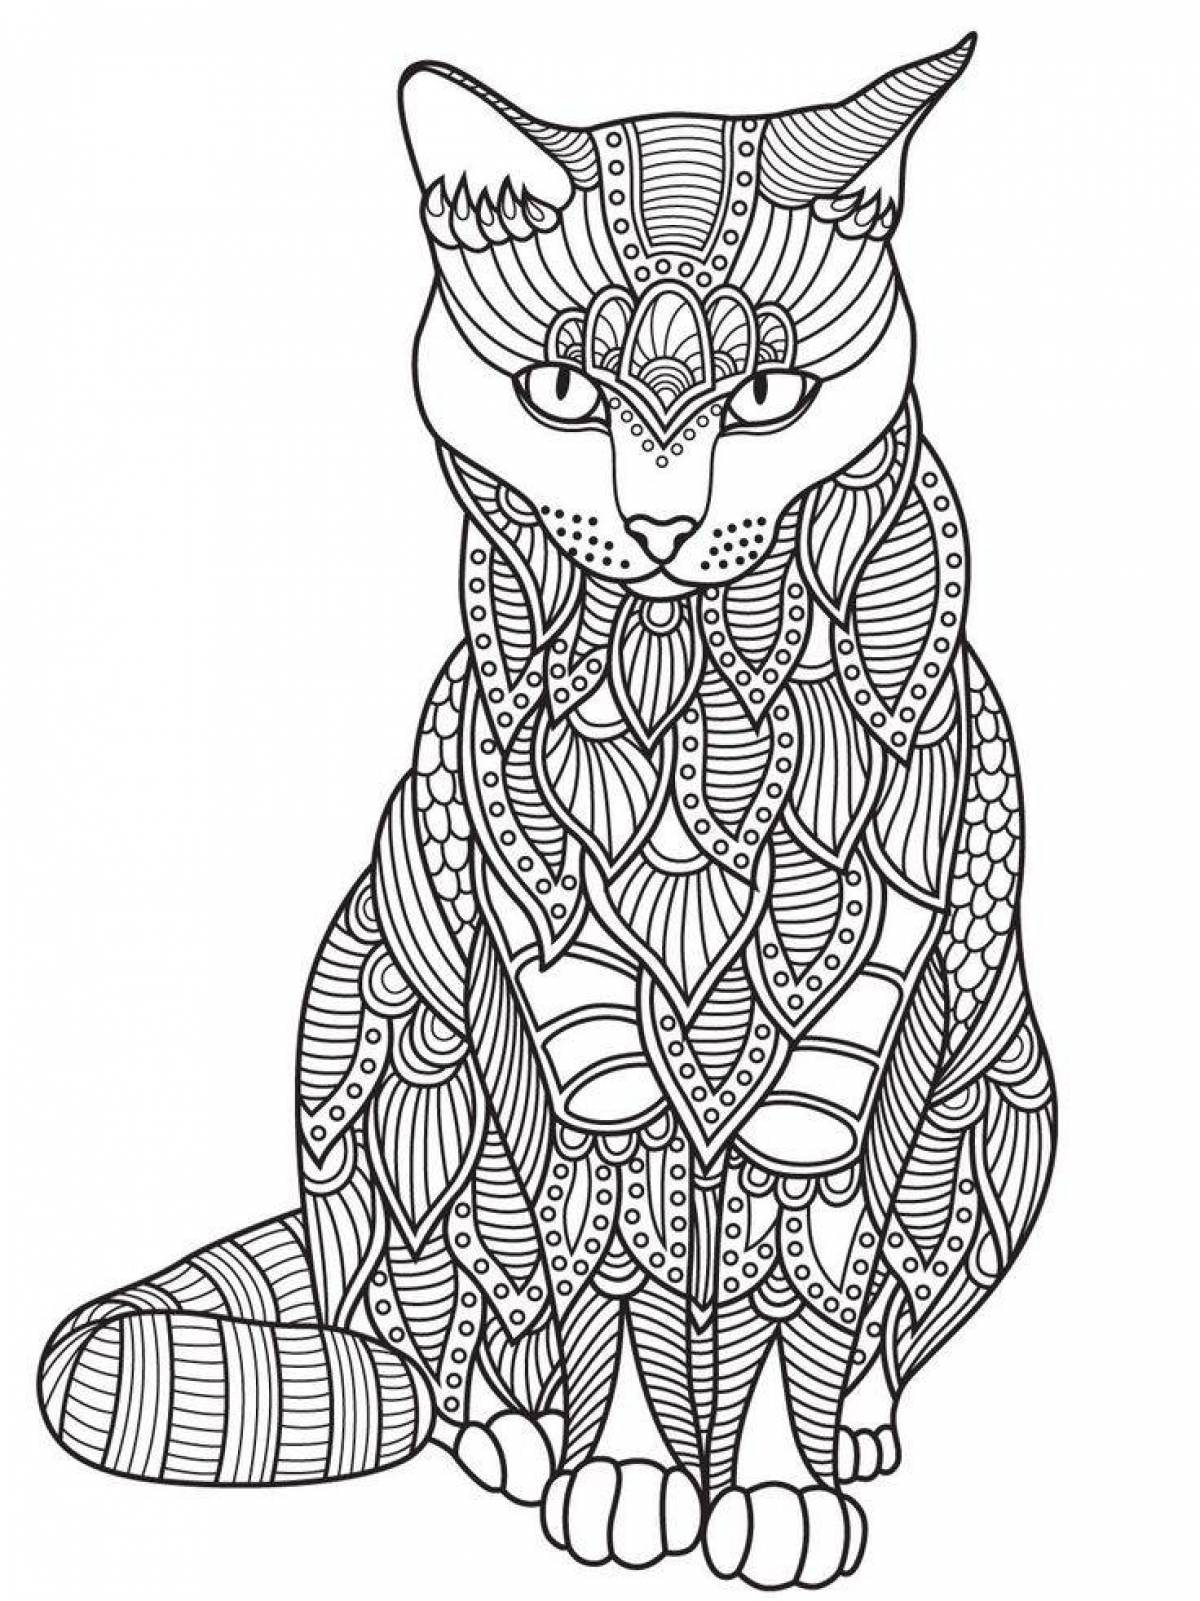 Complex animal coloring pages